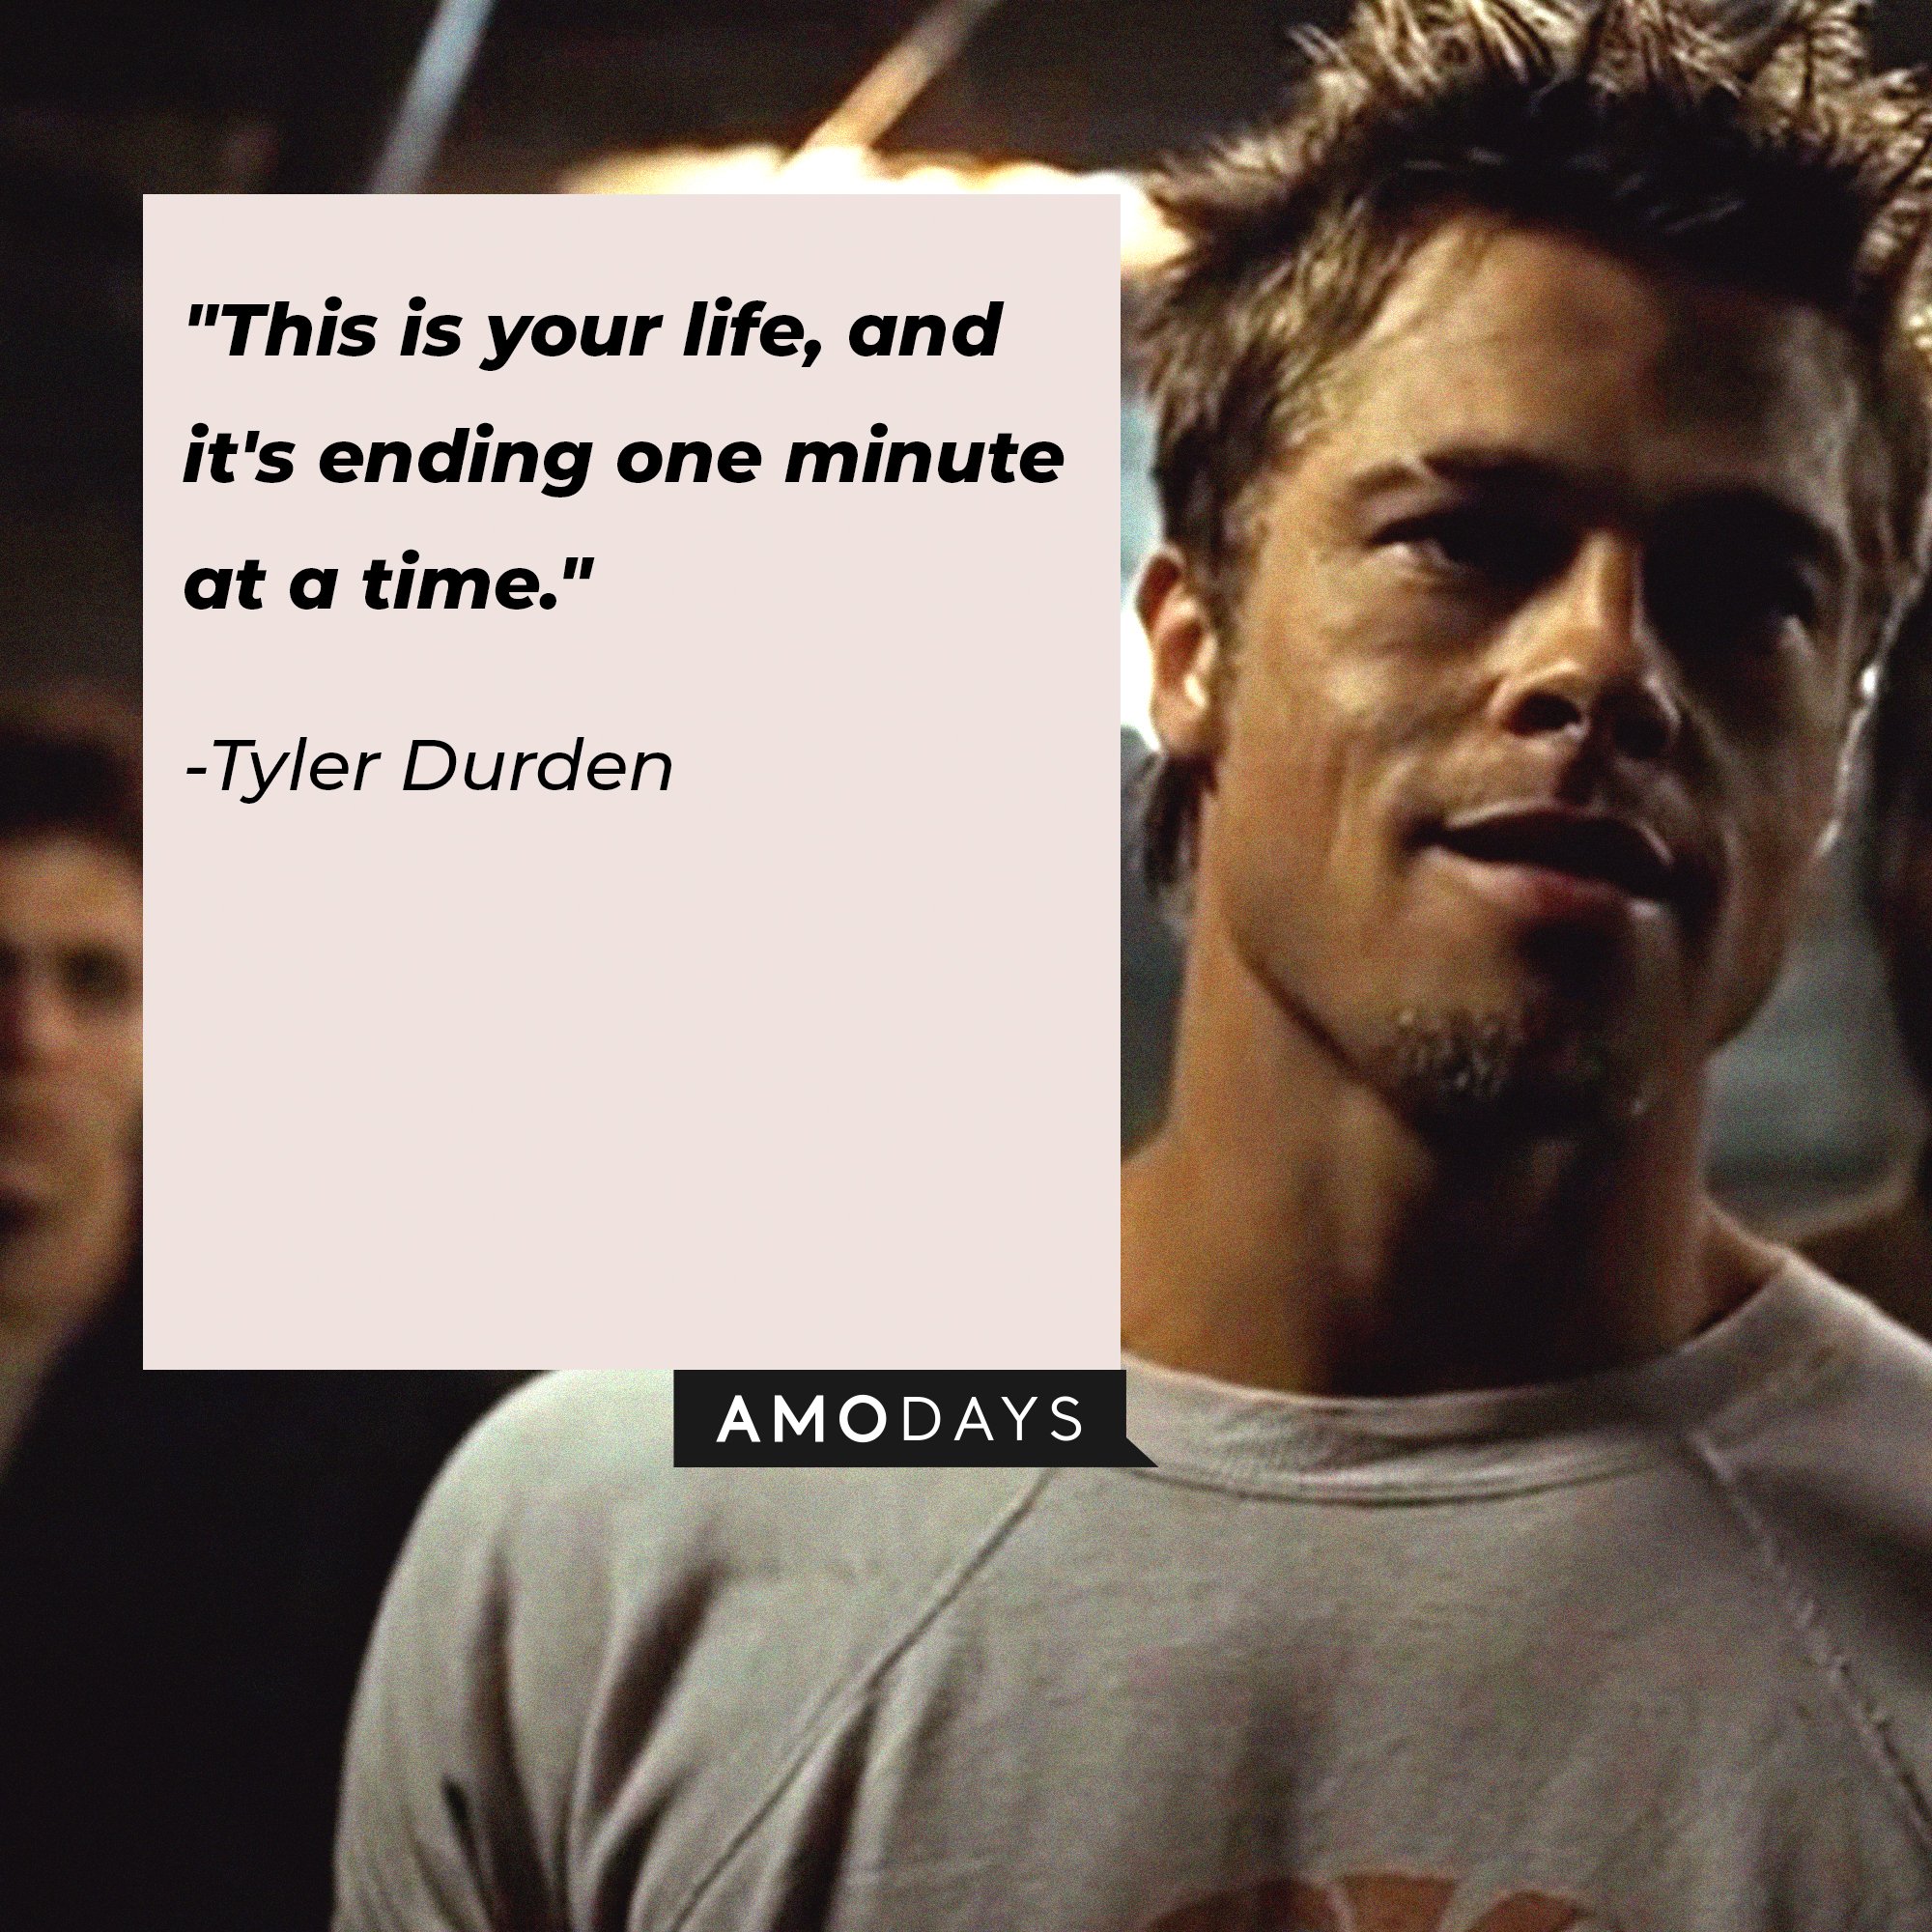 Tyler Durden’s quote: "This is your life, and it's ending one minute at a time." | Image: AmoDays